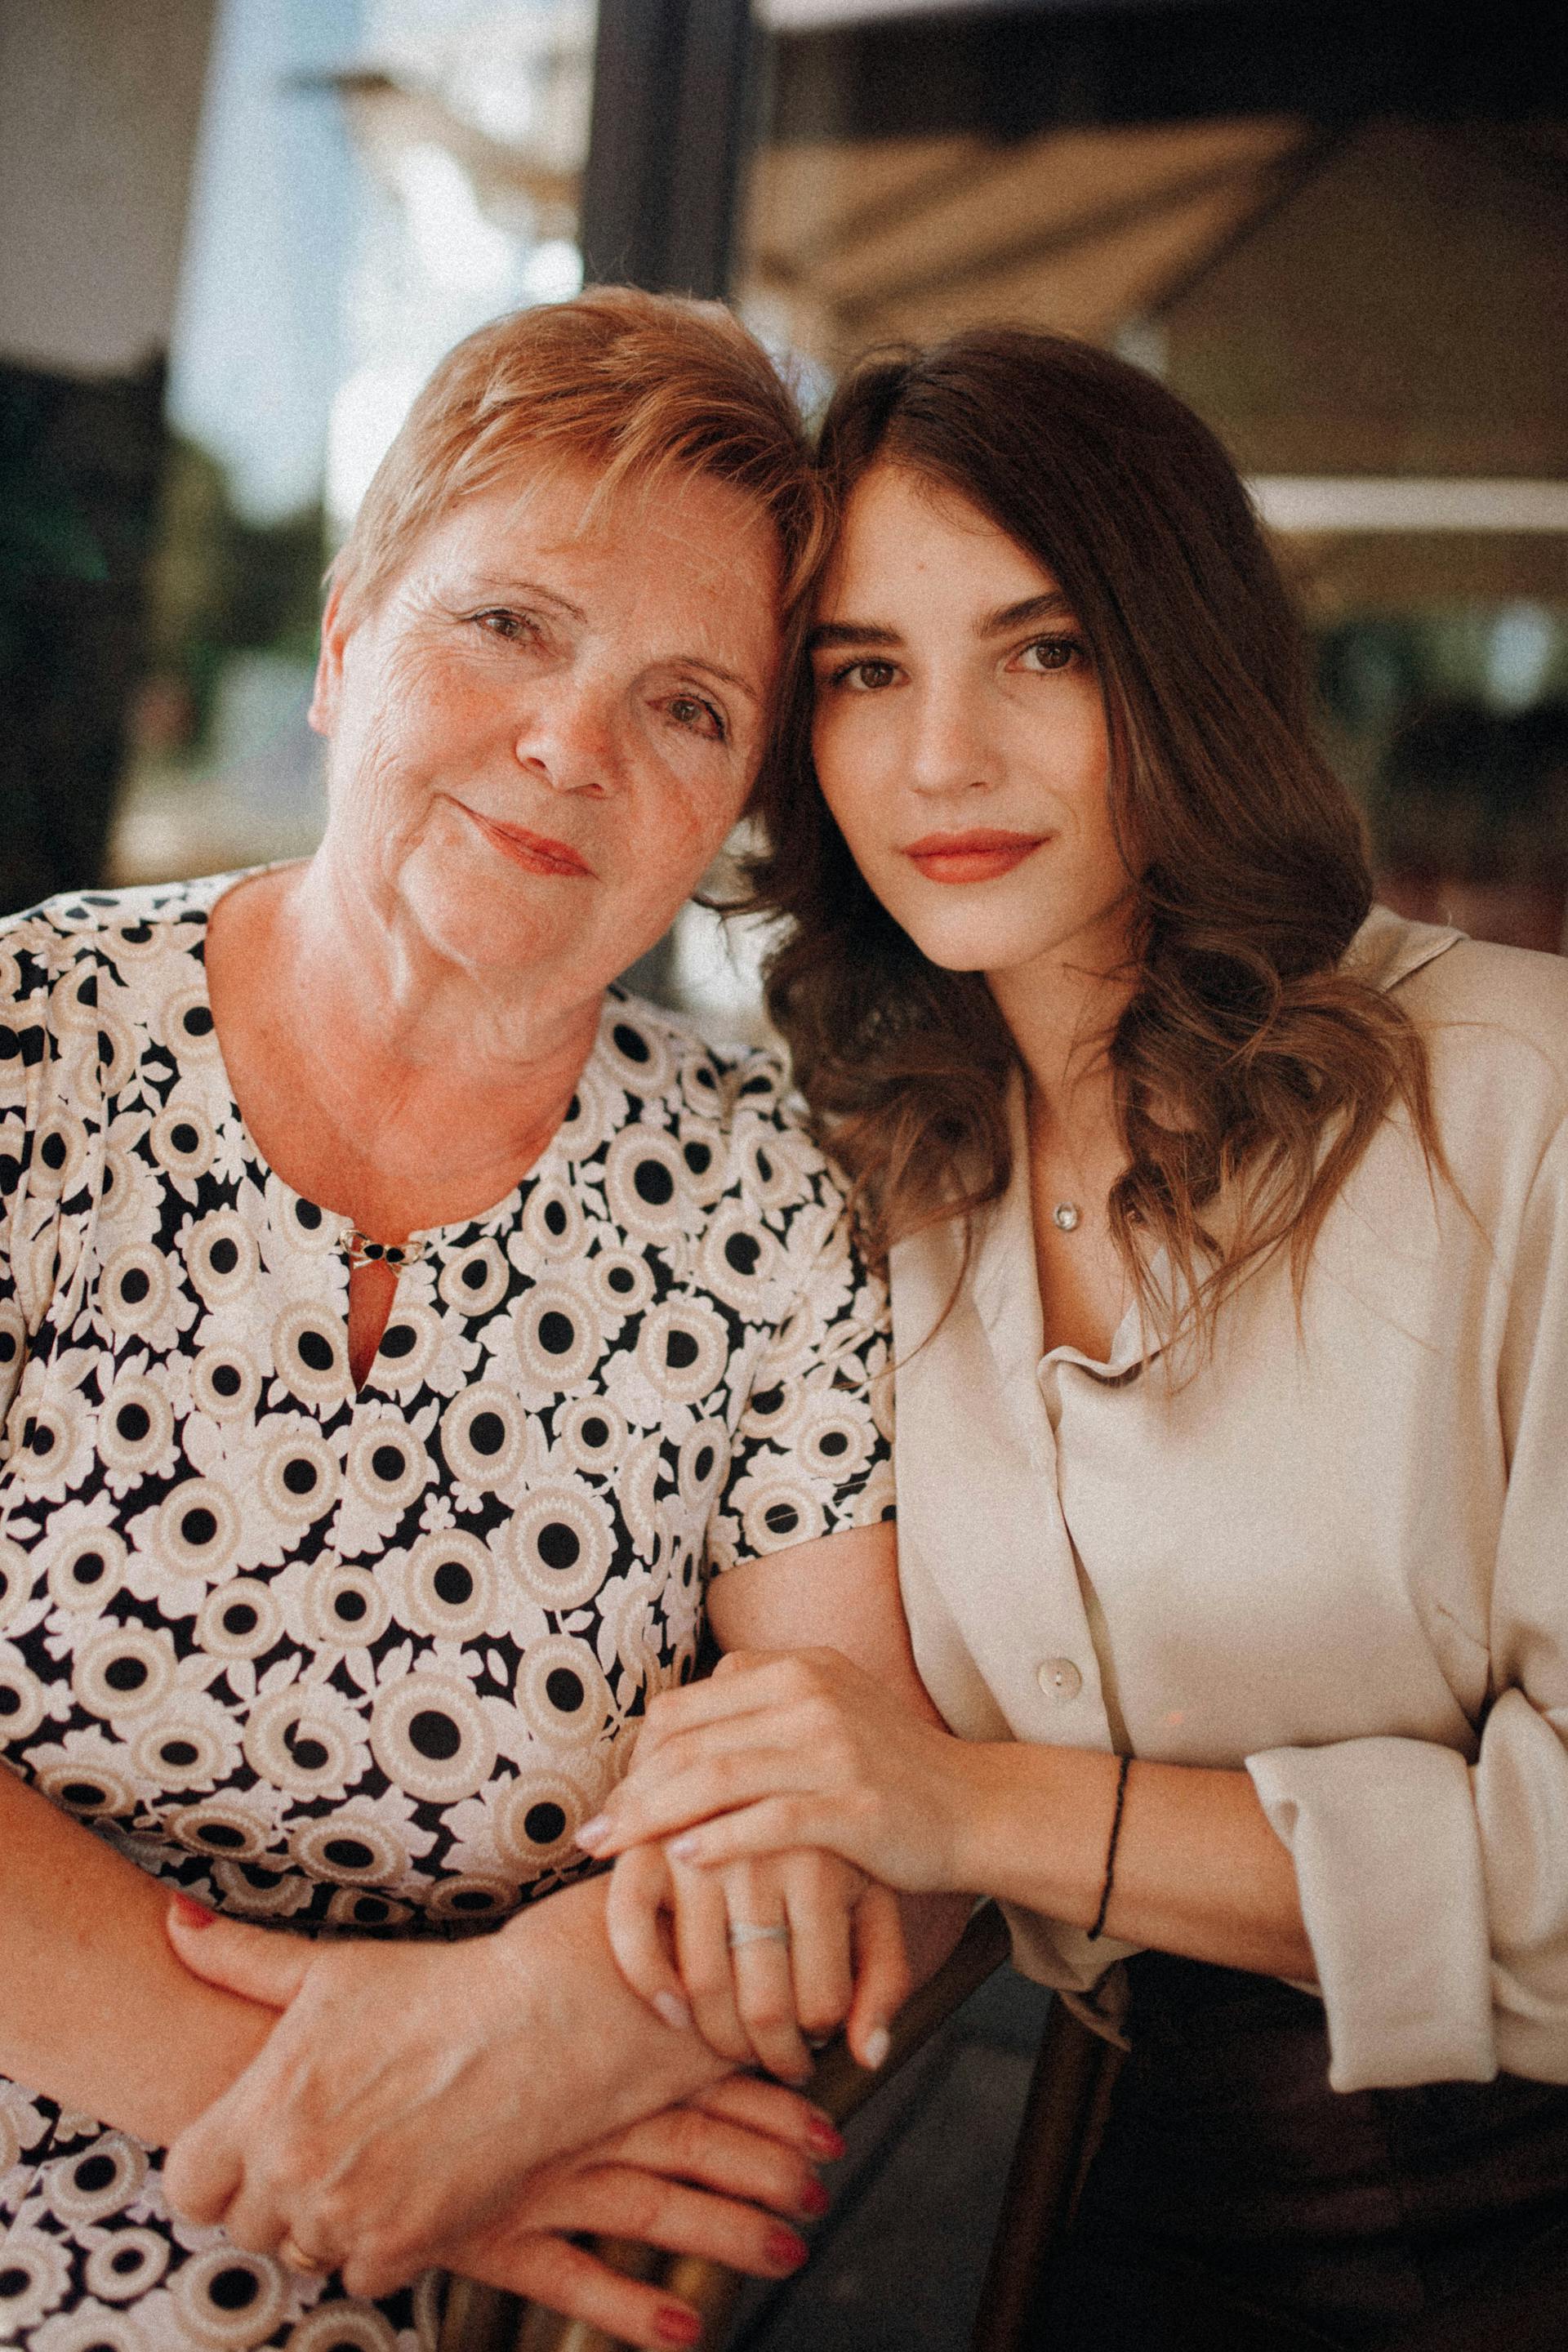 A woman sitting close to her senior mom | Source: Pexels